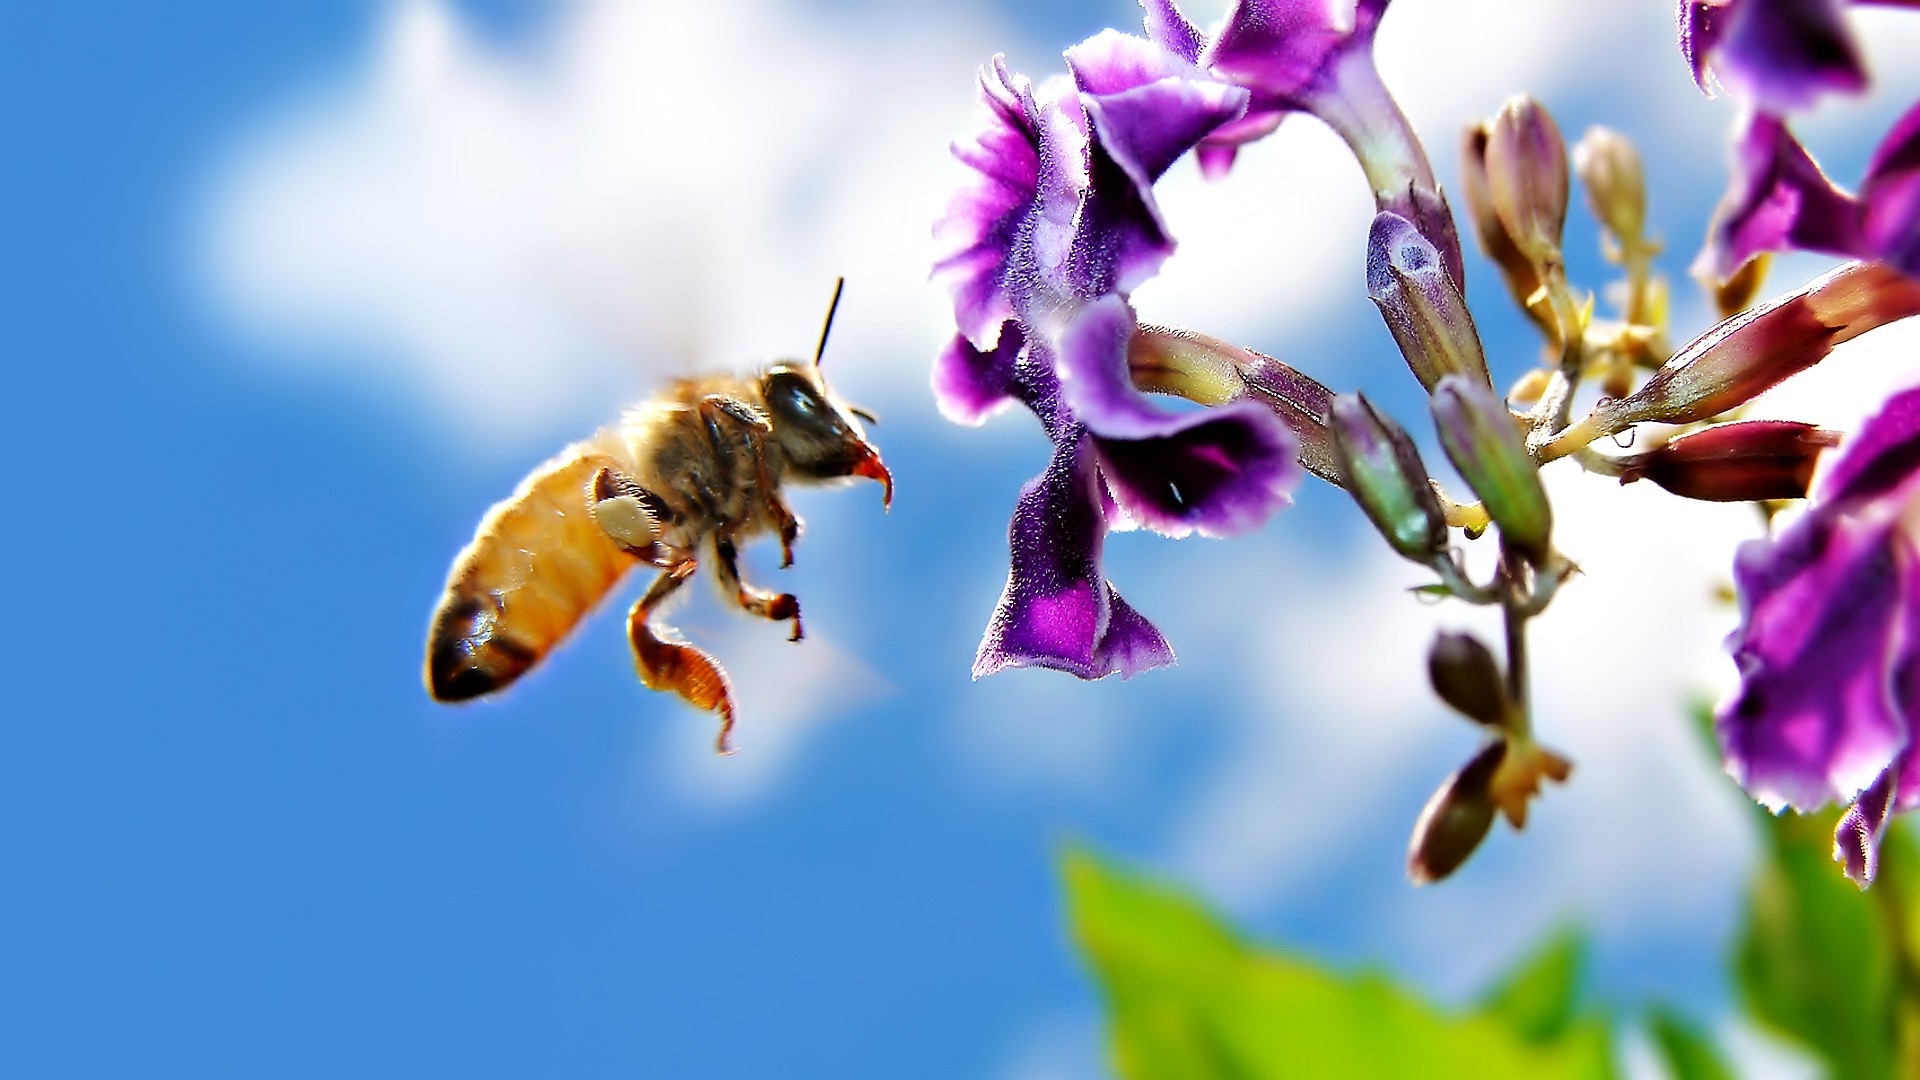 animals, Insect, Hymenoptera, Macro, Flowers, Bees Wallpaper